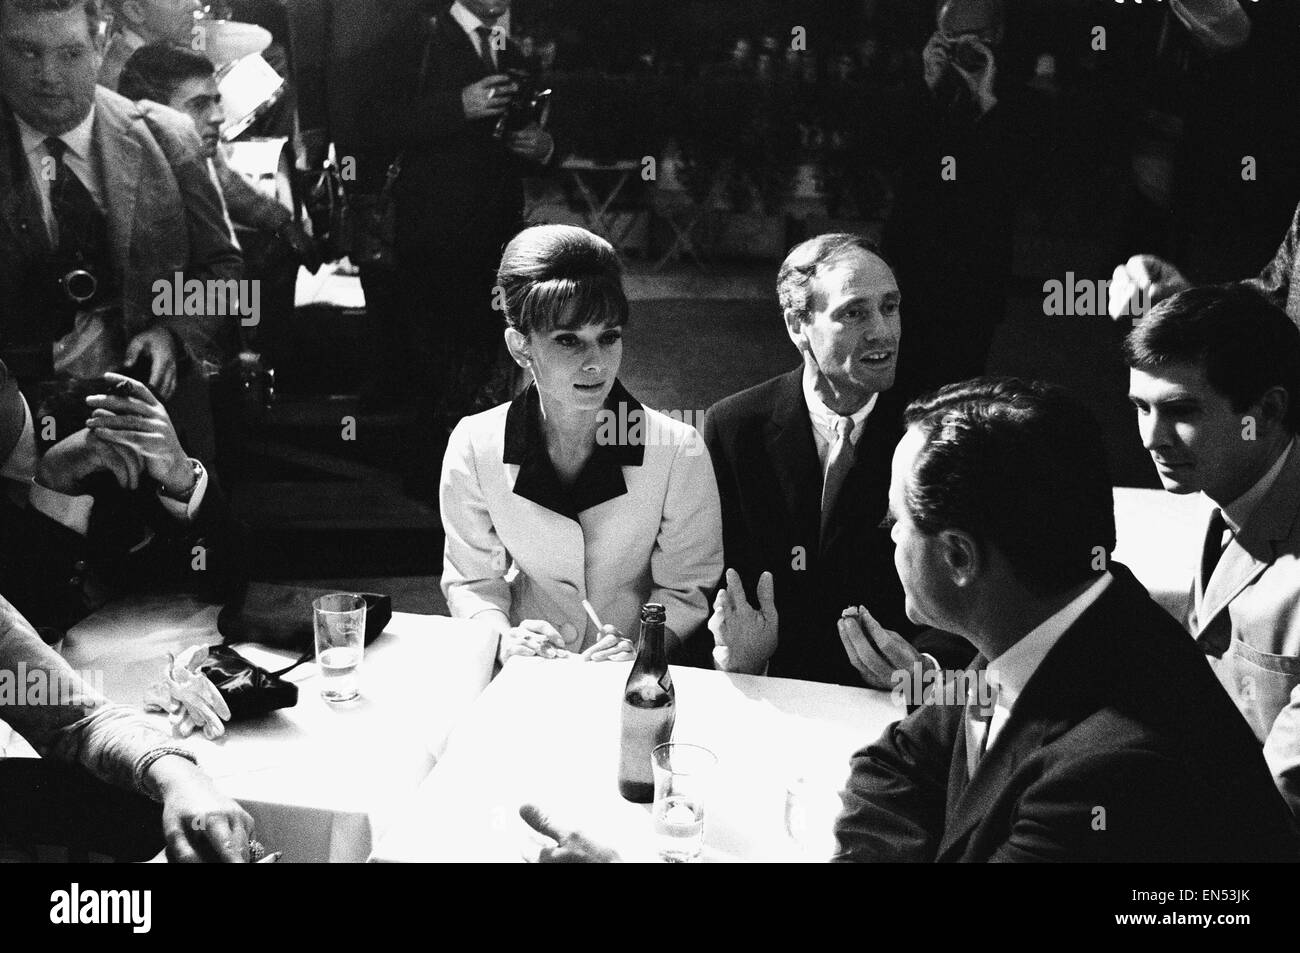 Actress Audrey Hepburn pictured at a party in Paris, France. 17th August 1961. Stock Photo